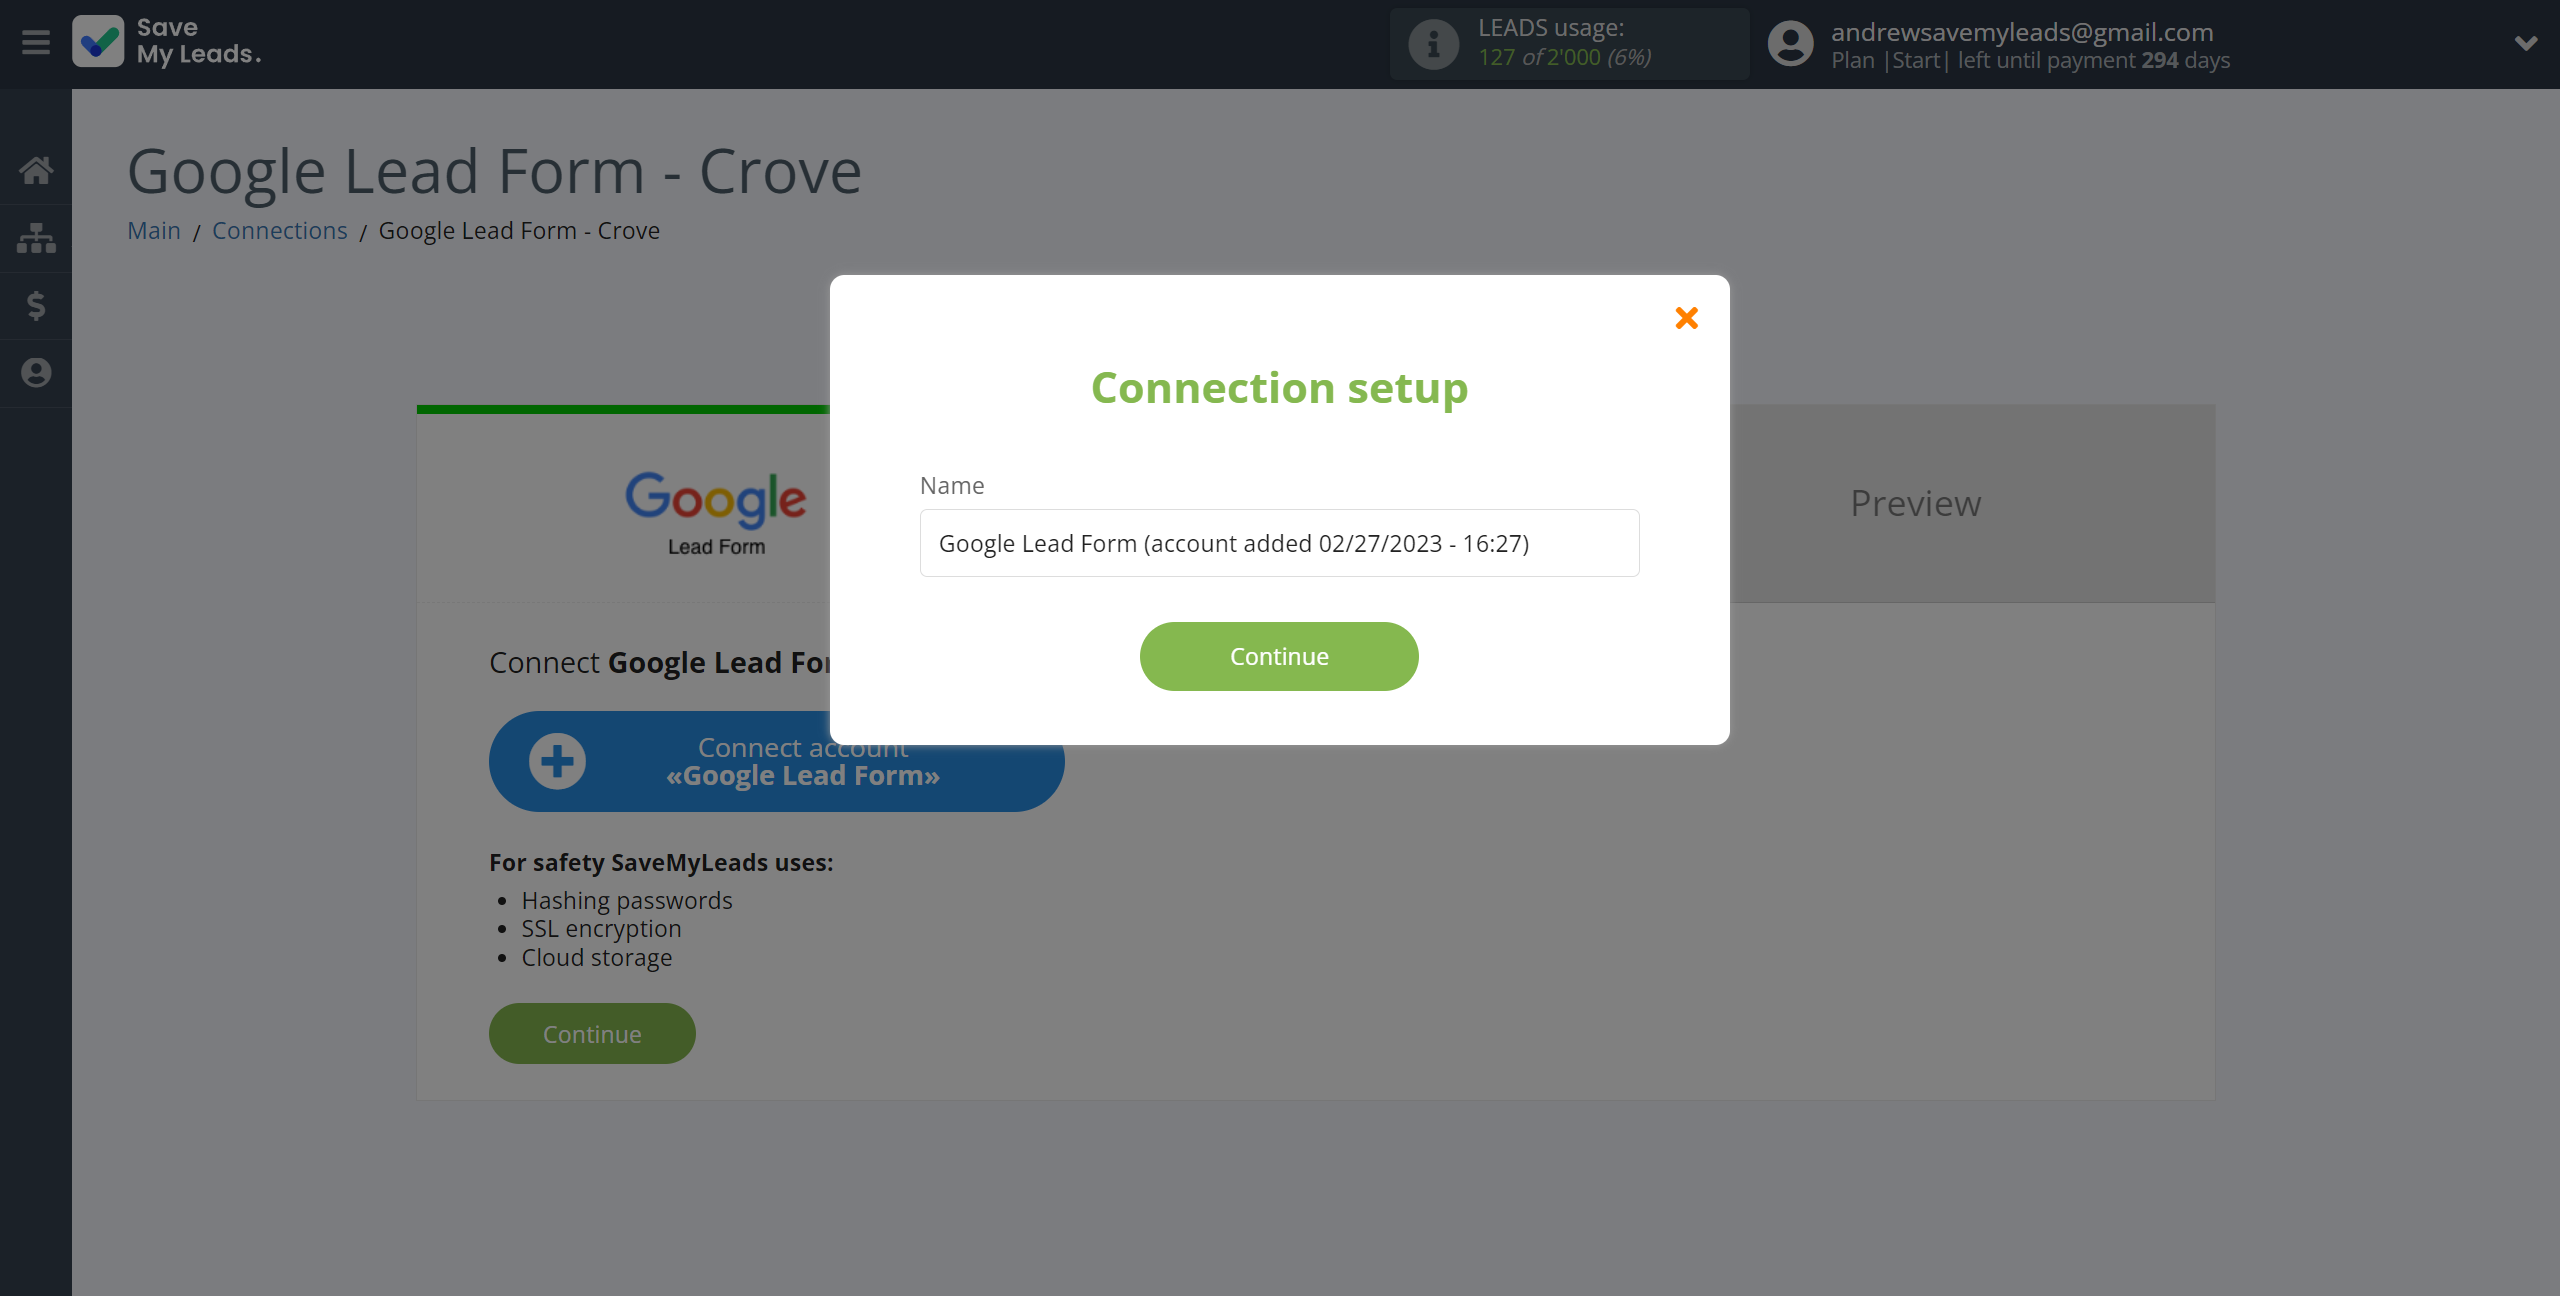 How to Connect Google Lead Form with Crove | Data Source account connection